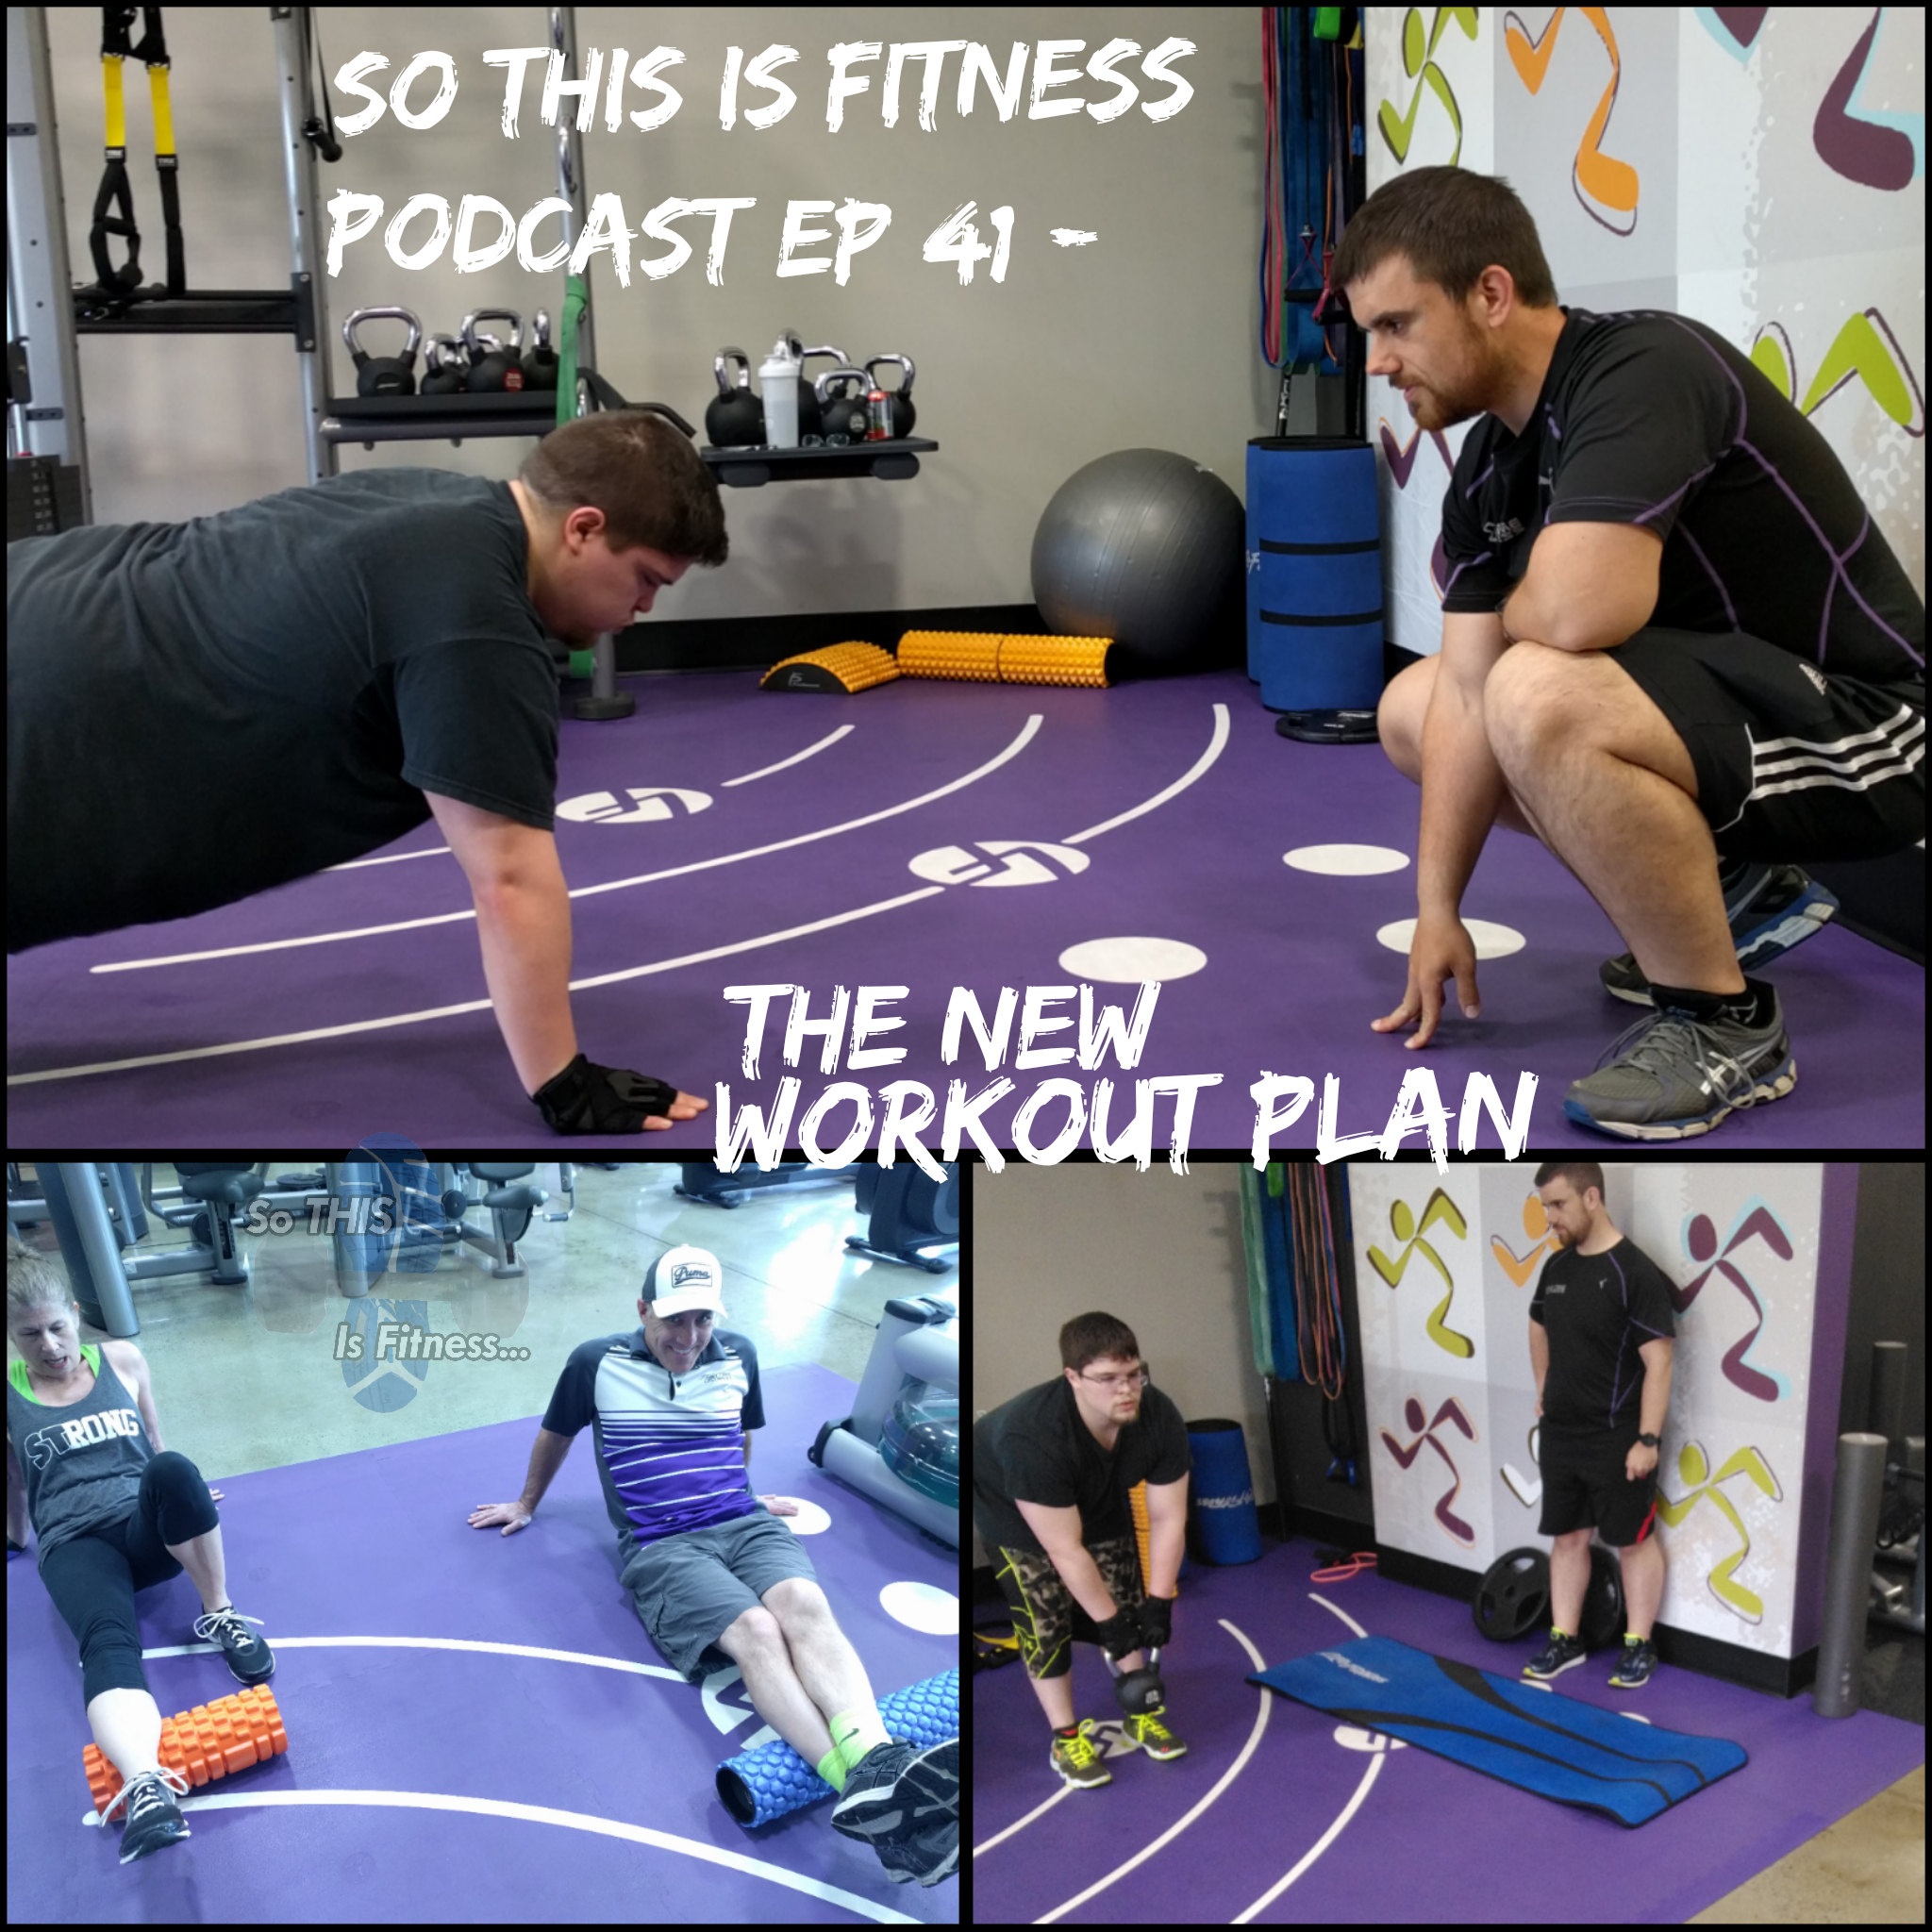 The New Workout Plan (Podcast #41)